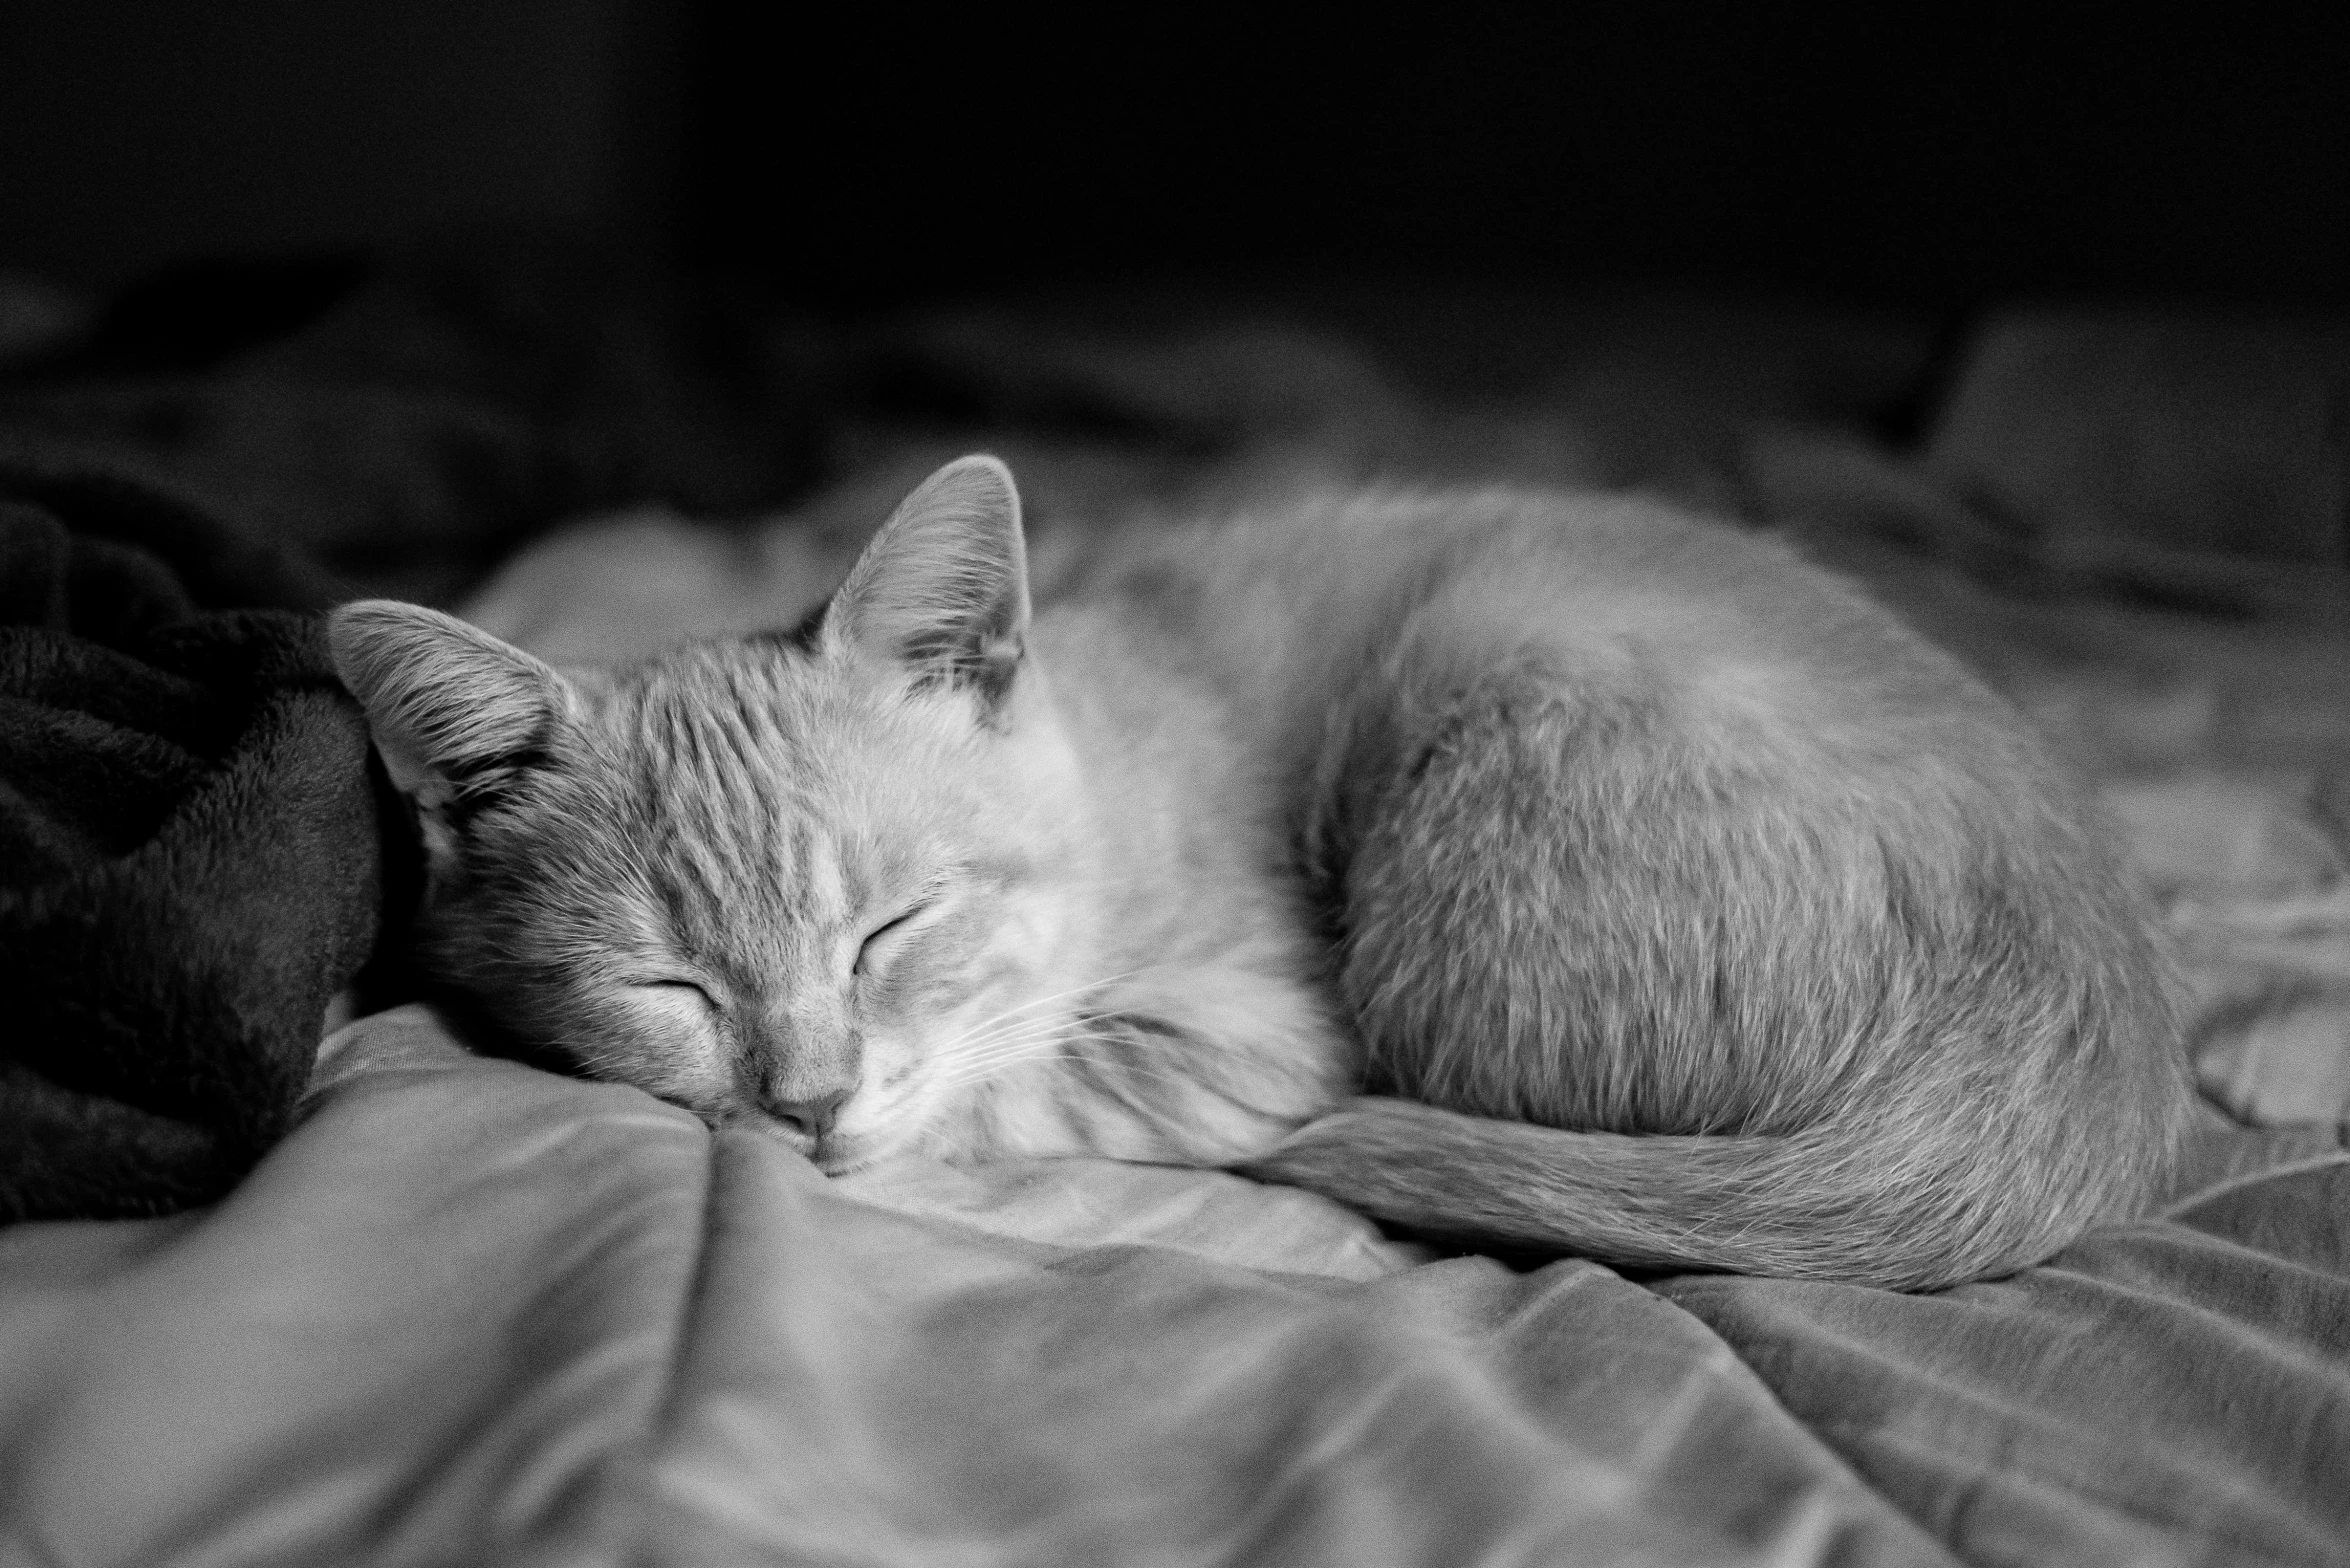 a black and white image of a kitten sleeping on a bed